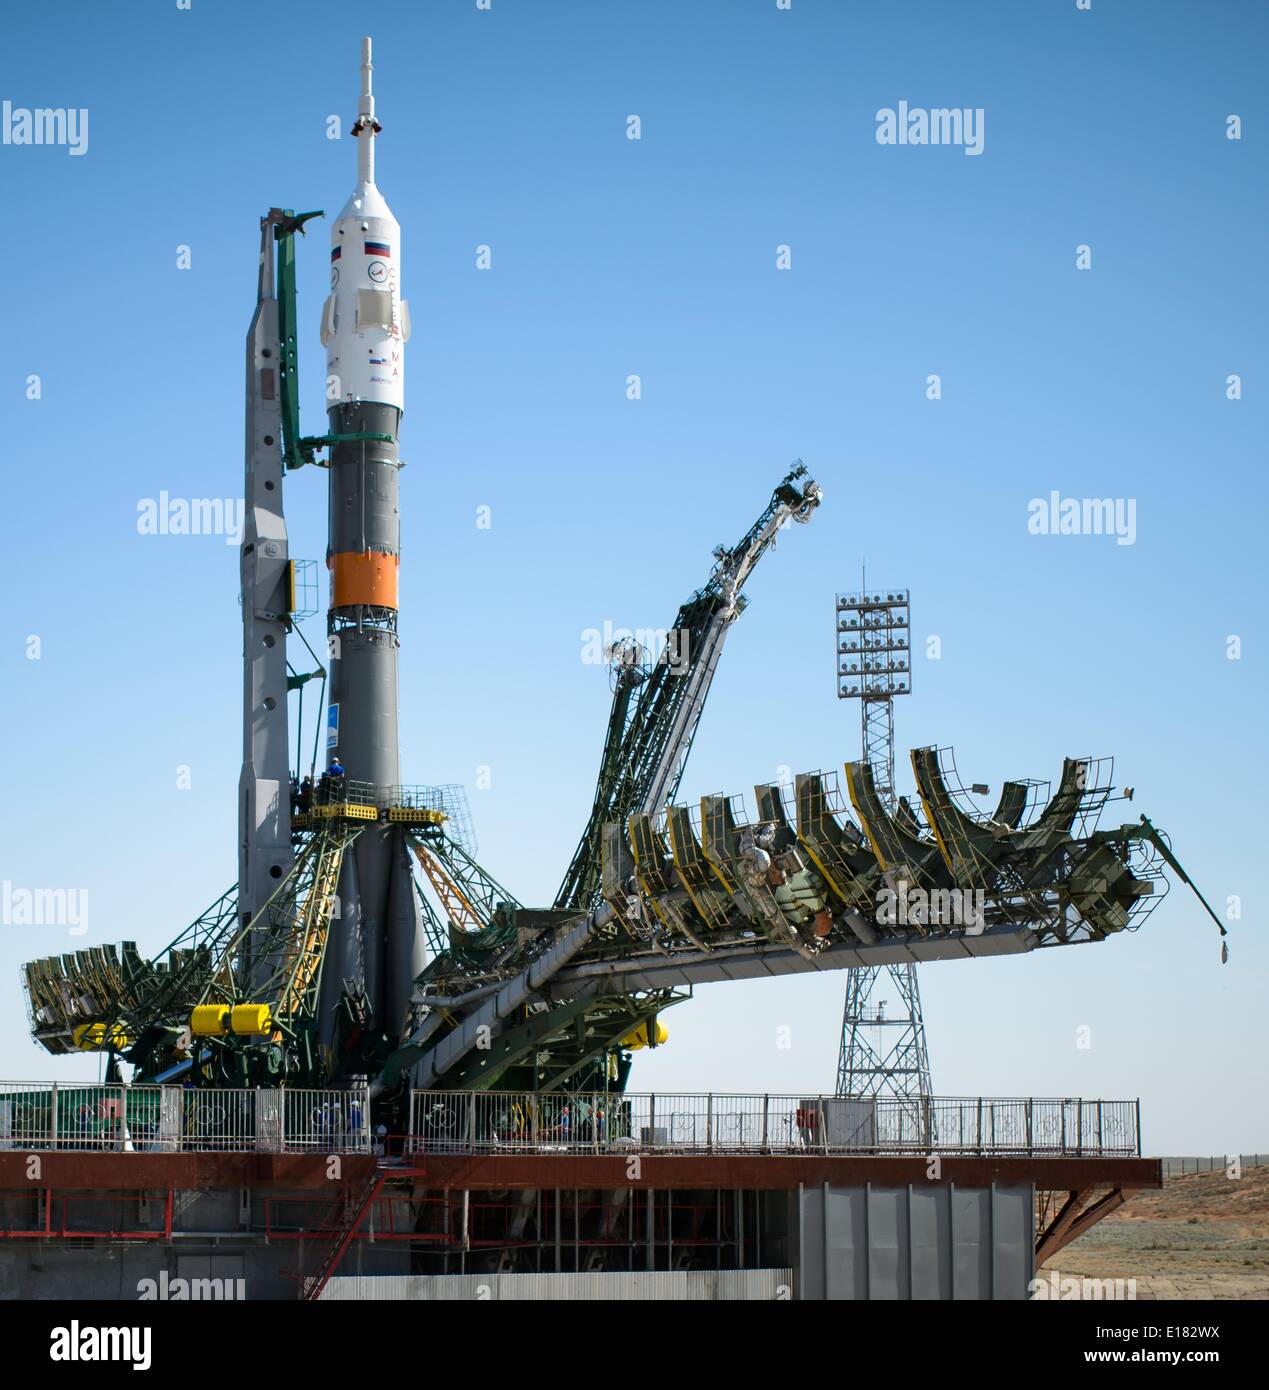 masterpiece Remains you are The Roscosmos Soyuz TMA-13M spacecraft is moved into vertical position as  the gantry is closed on the launch pad in preparation for launch to the  International Space Station May 26, 2014 at